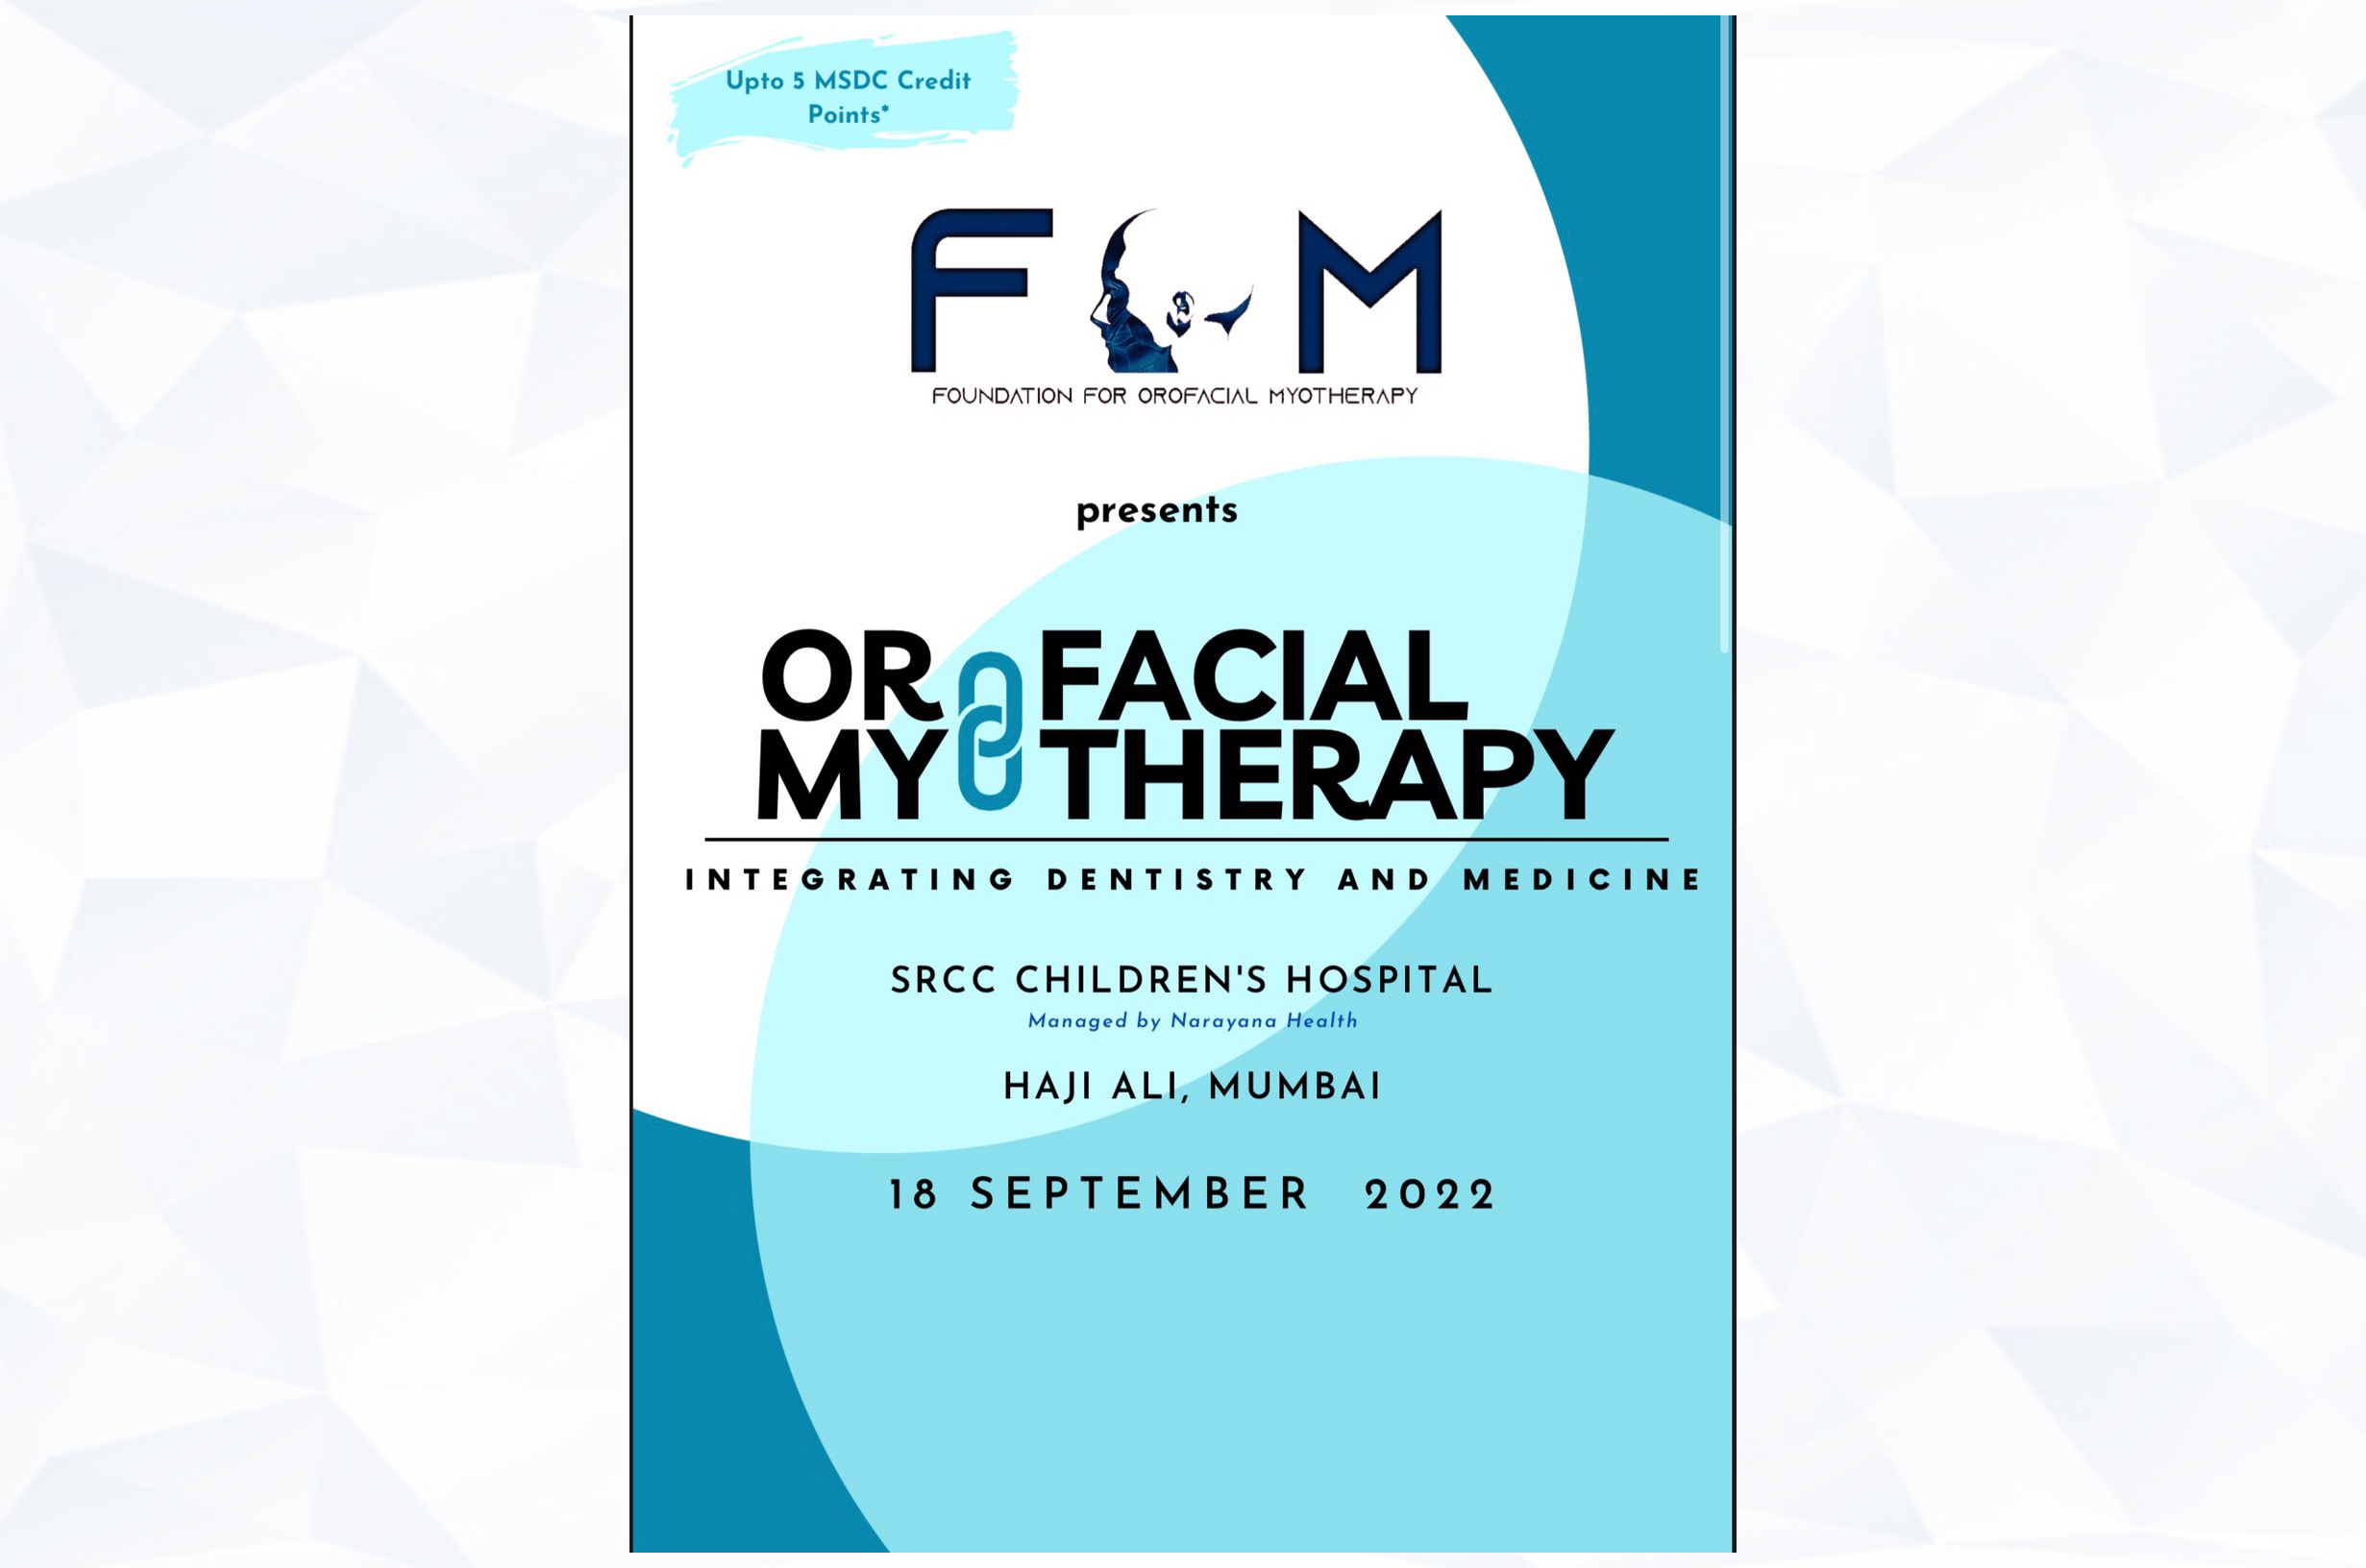 past Event - Orofacial Myotherapy, Integrating dentistry and medicine